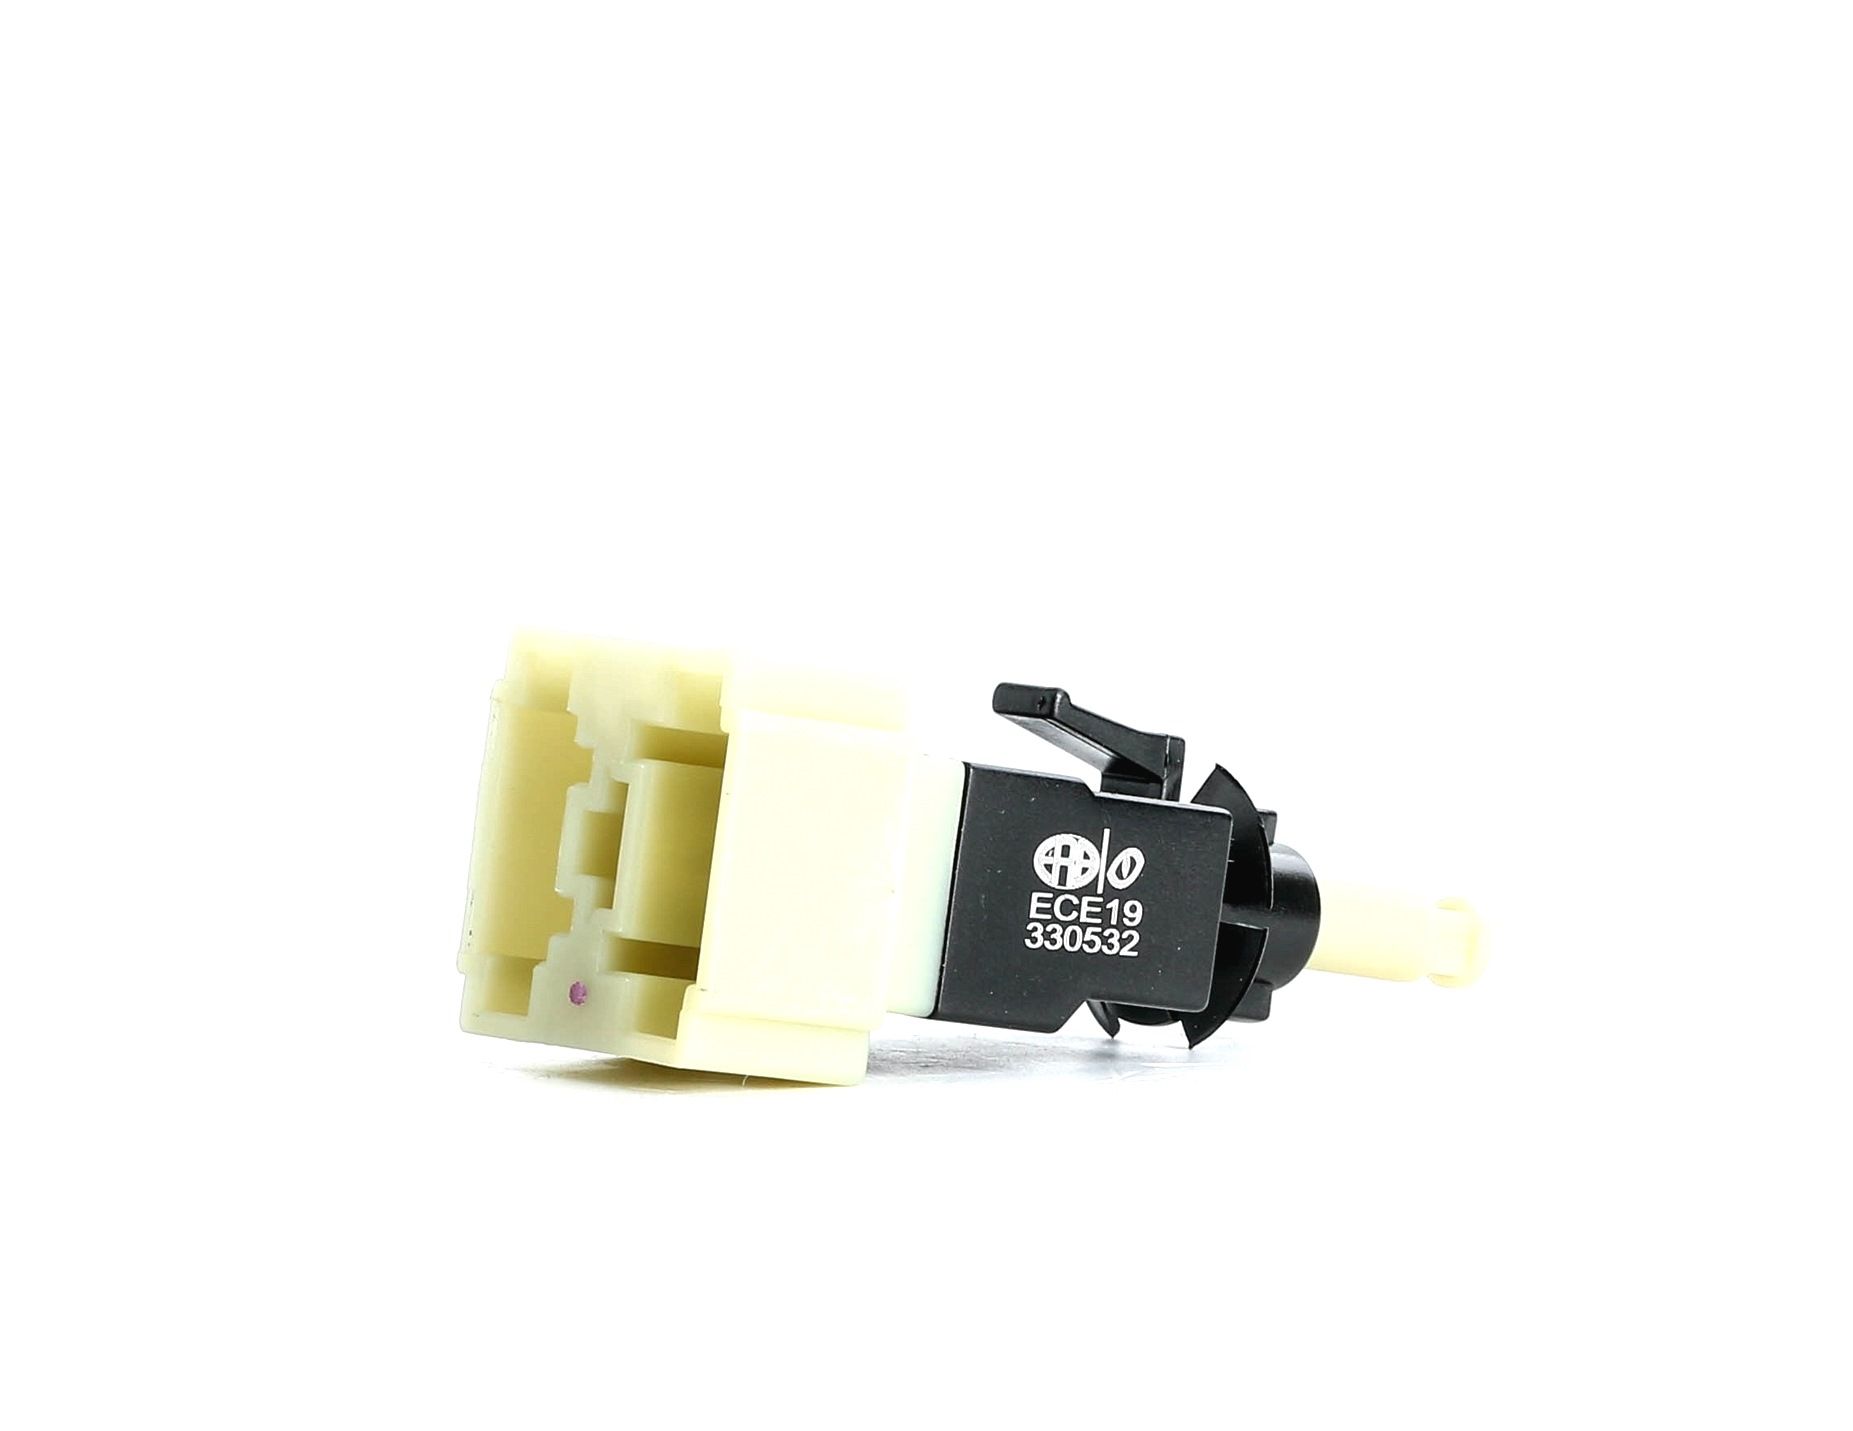 ERA Mechanical, 6-pin connector Number of pins: 6-pin connector Stop light switch 330532 buy